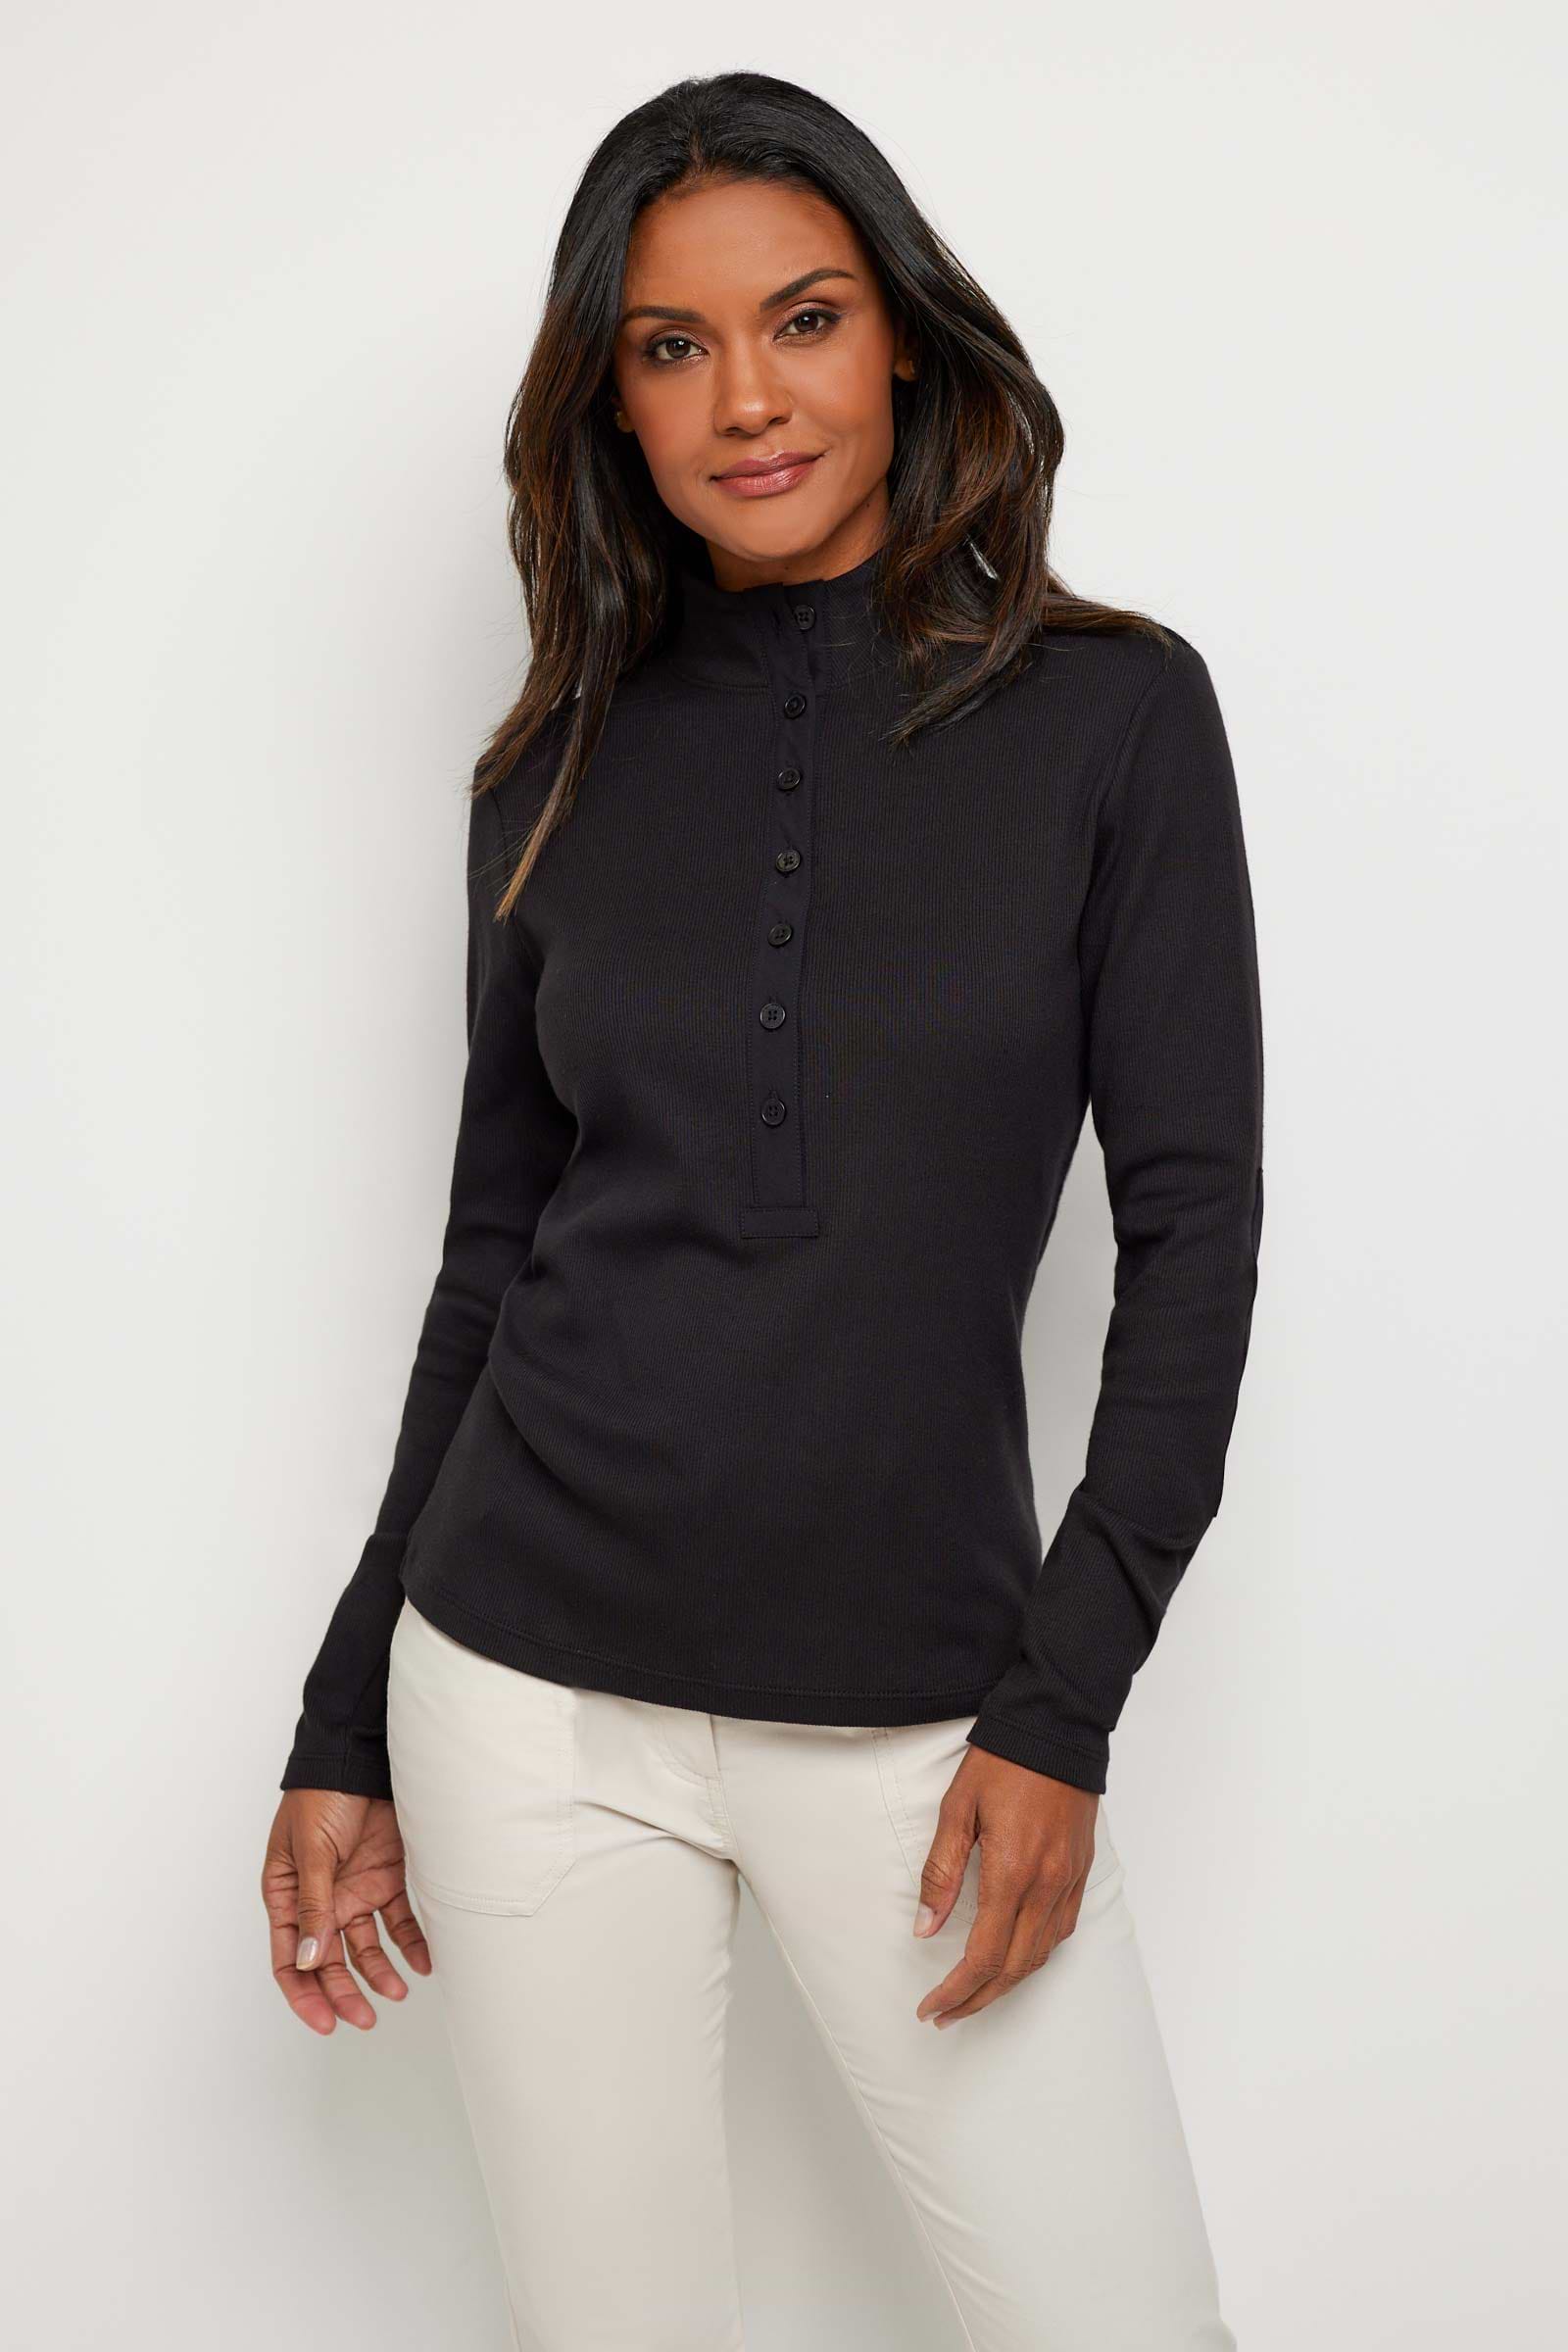 The Best Travel Top. Woman Showing the Front of a Monroe Henley Top in Black.